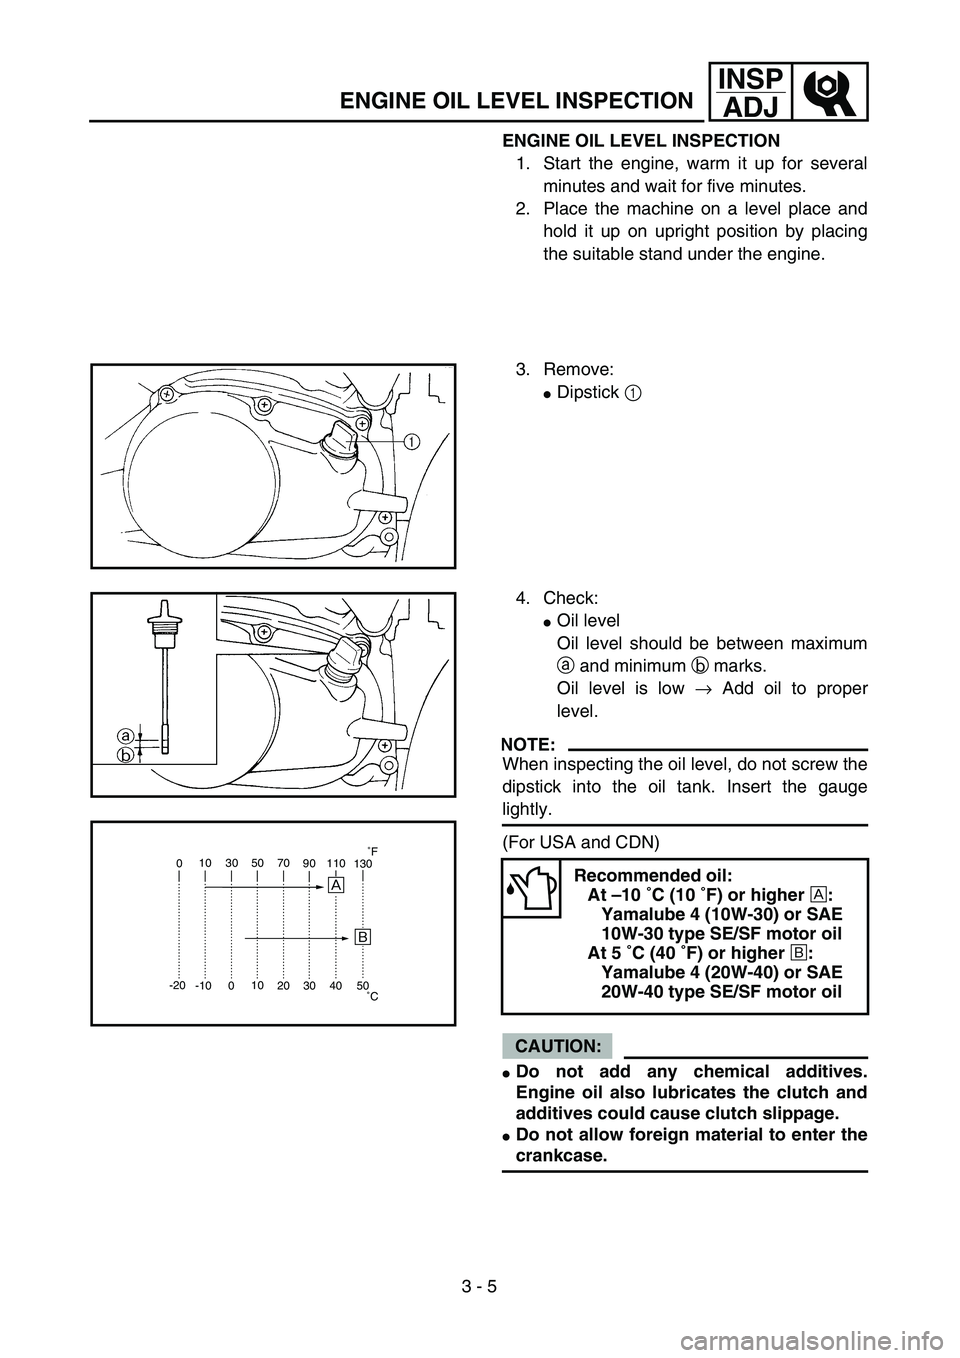 YAMAHA TTR90 2004  Owners Manual  
3 - 5
INSP
ADJ
 
ENGINE OIL LEVEL INSPECTION 
1. Start the engine, warm it up for several
minutes and wait for five minutes.
2. Place the machine on a level place and
hold it up on upright position 